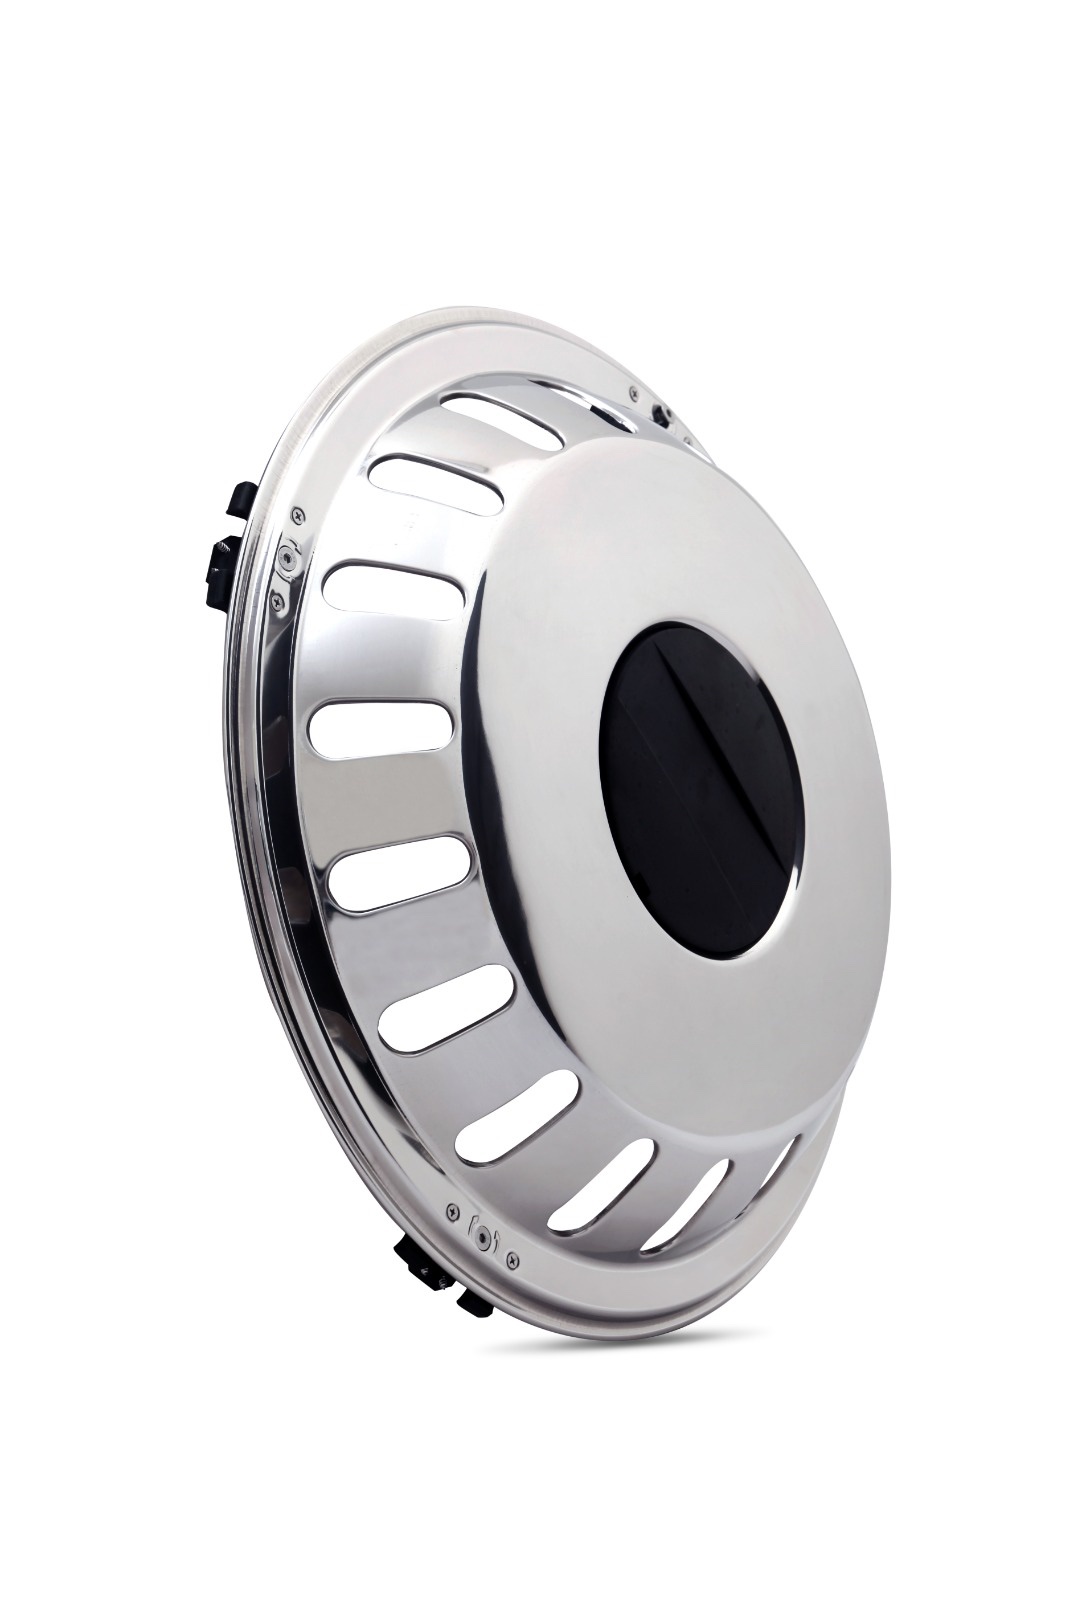 19,5 Stainless Steel Wheel Covers front ,Code: C1903 F